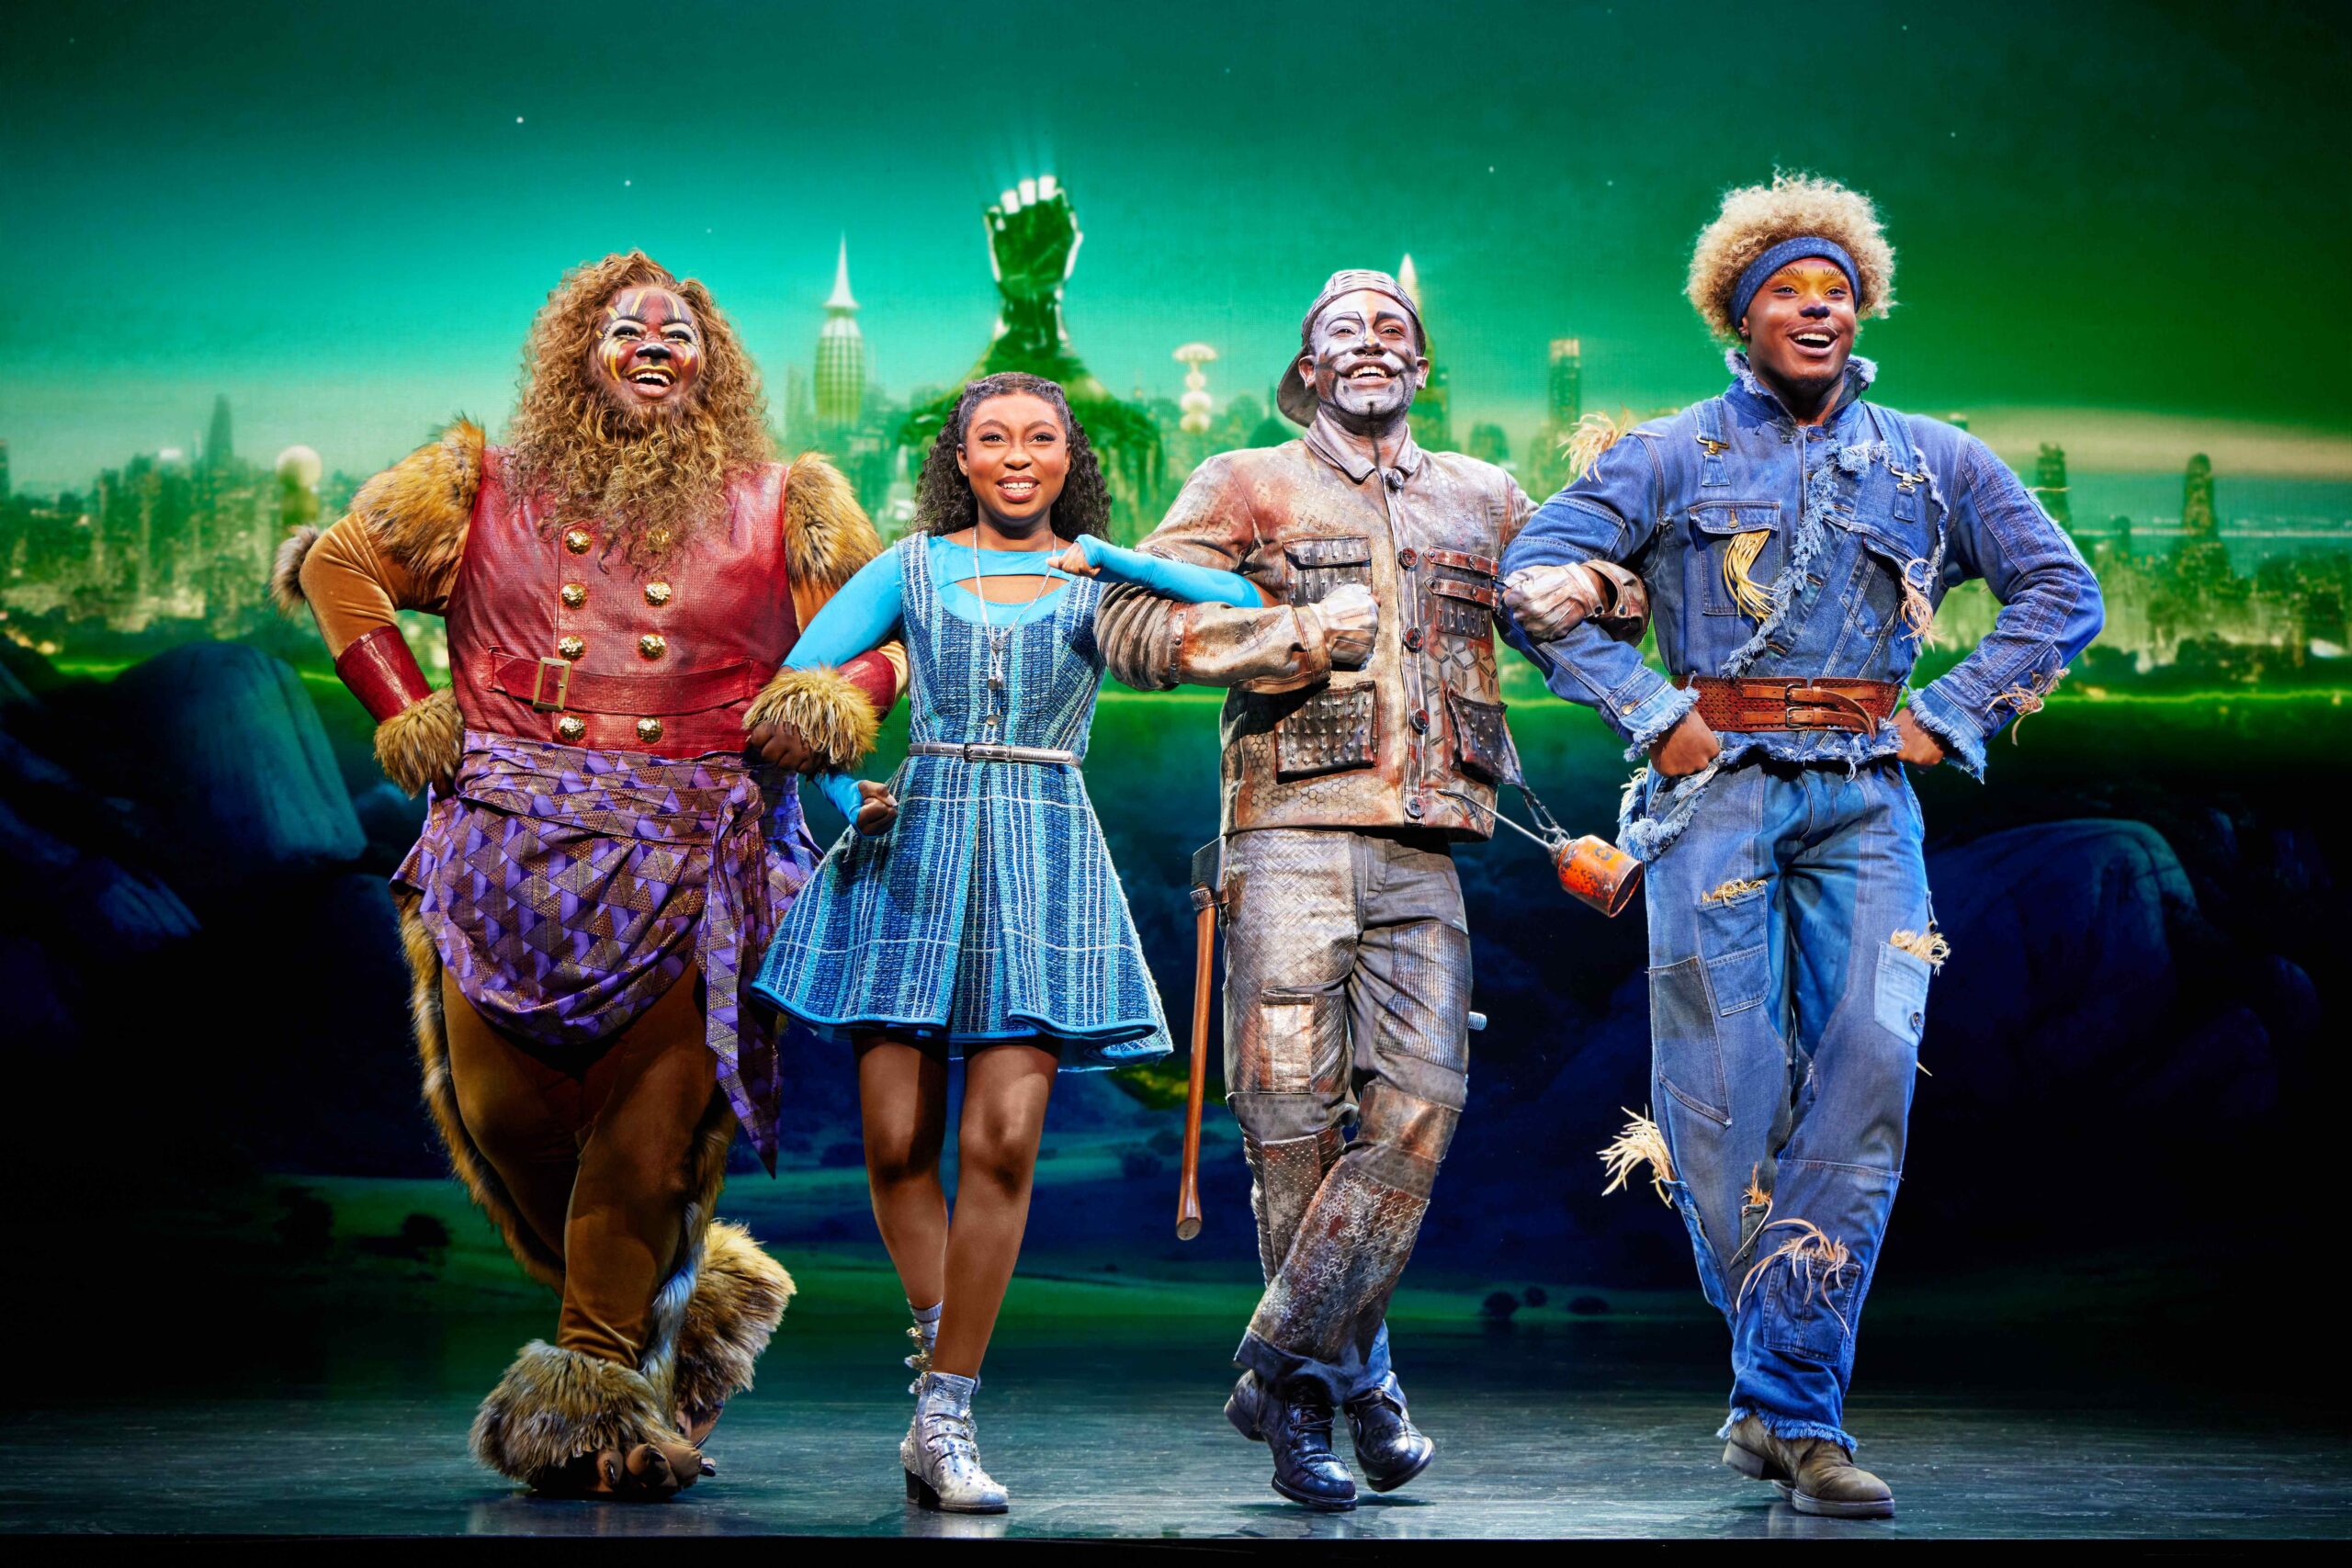 'The Wiz' Cast And Crew On Exciting Broadway Return: 'Something That's Going To Take Broadway By Storm'